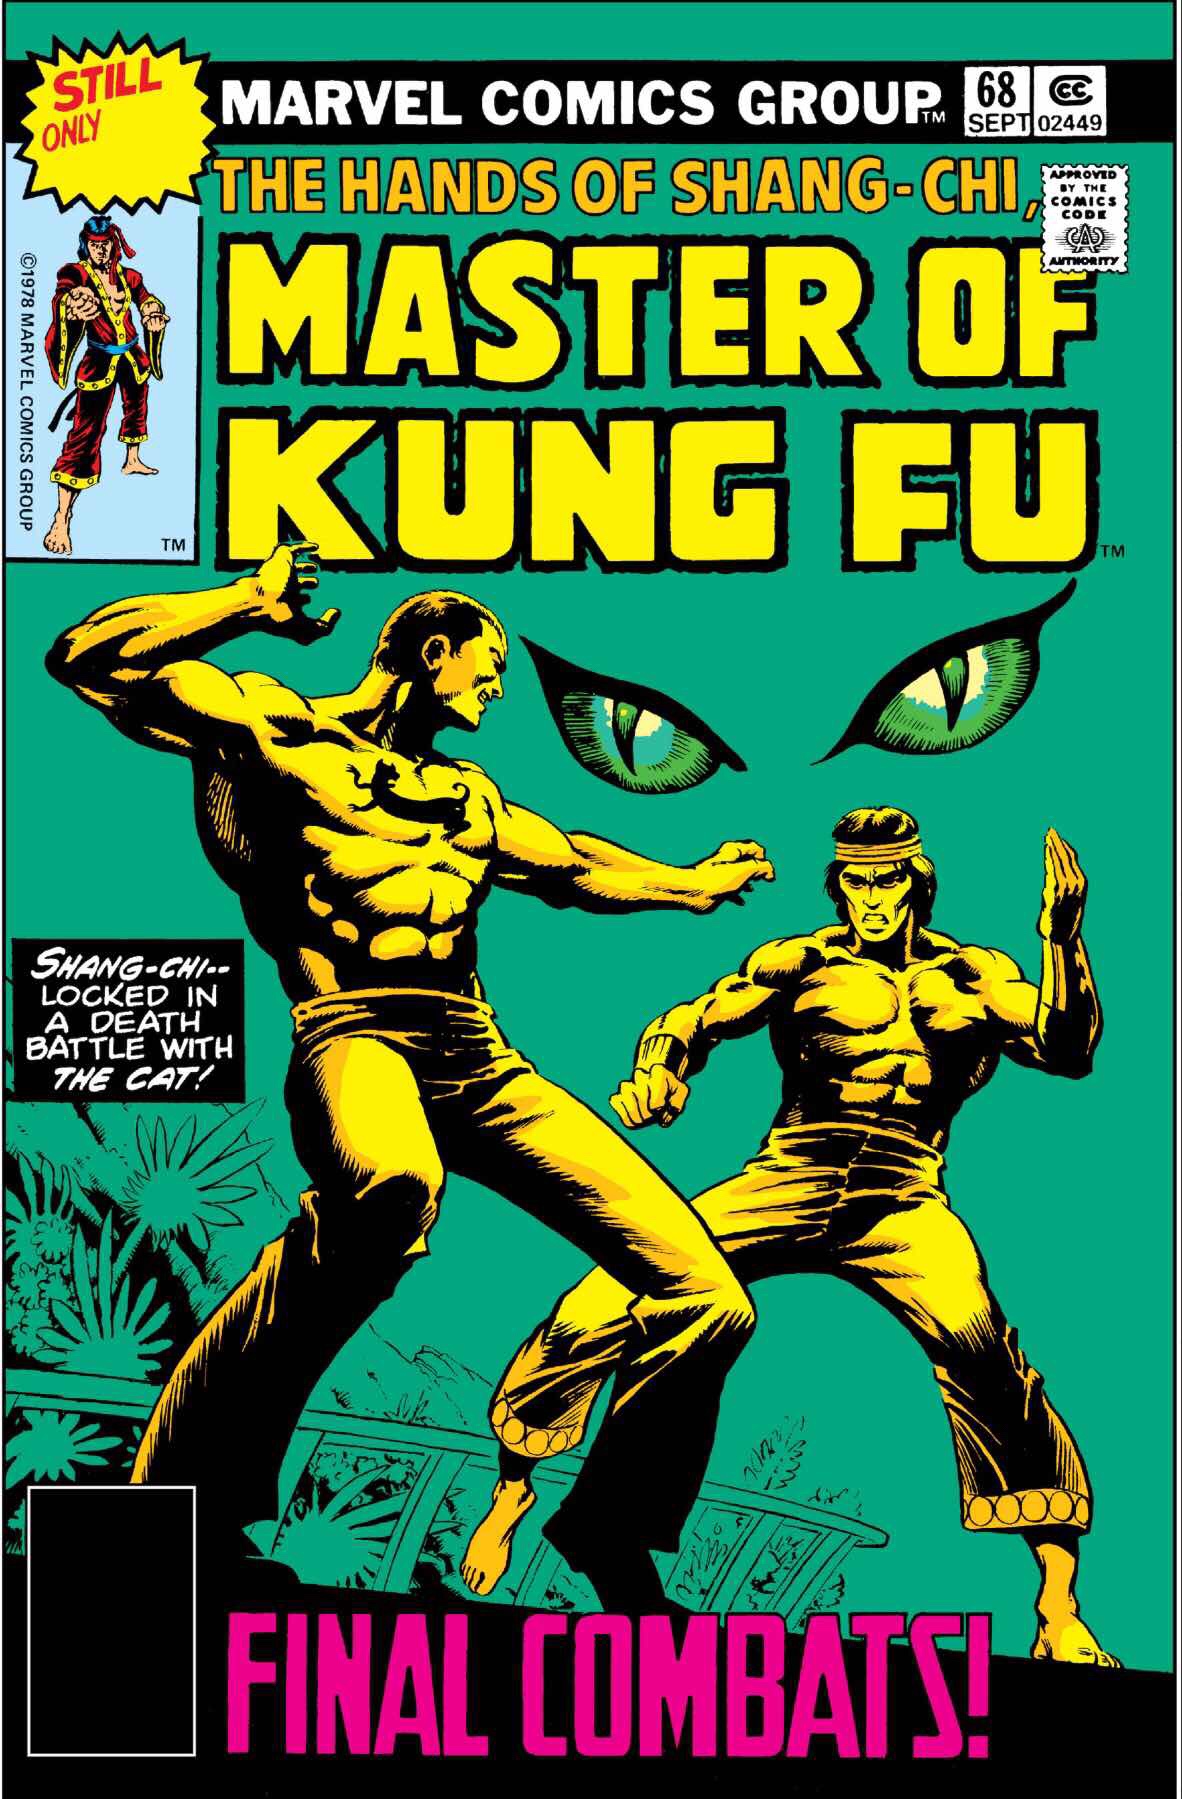 The Hands of Shang-Chi Master of Kung Fu - issue 68